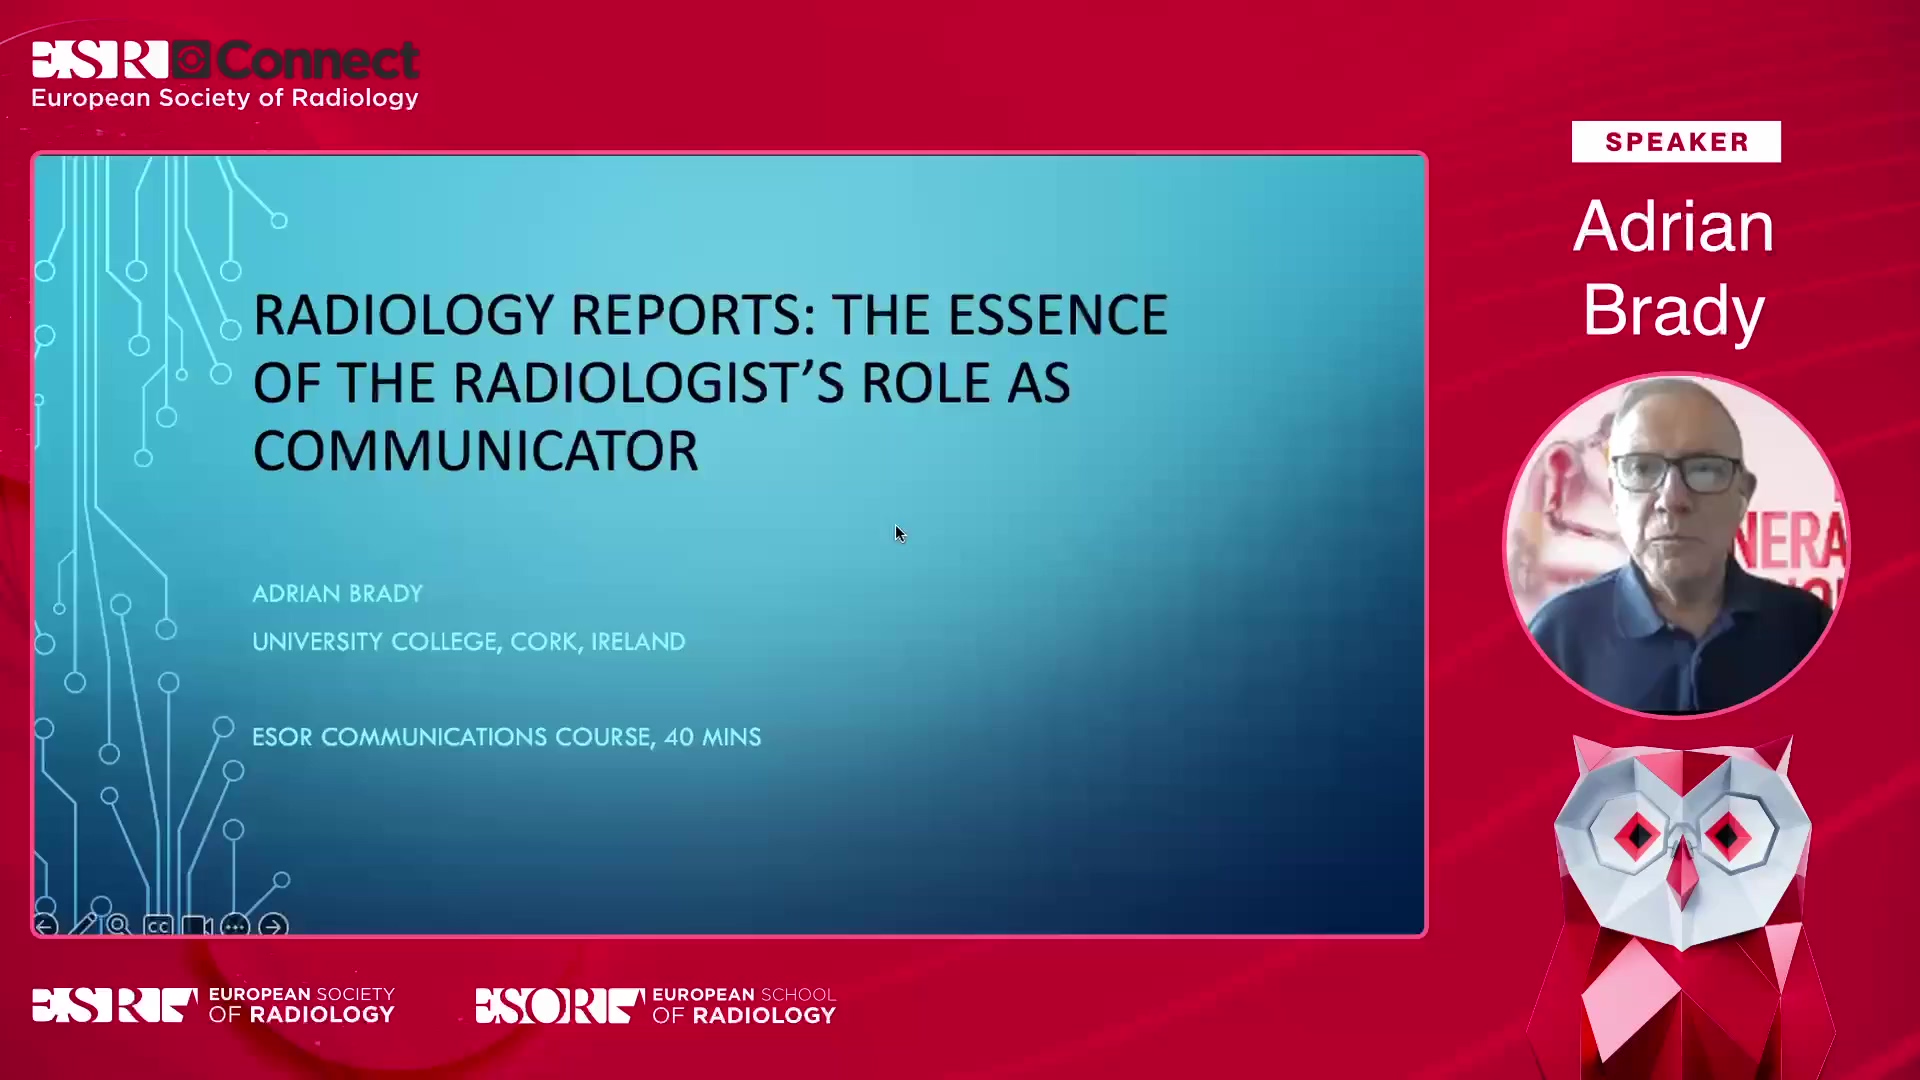 Radiology reports: the essence of the radiologist’s role as communicator